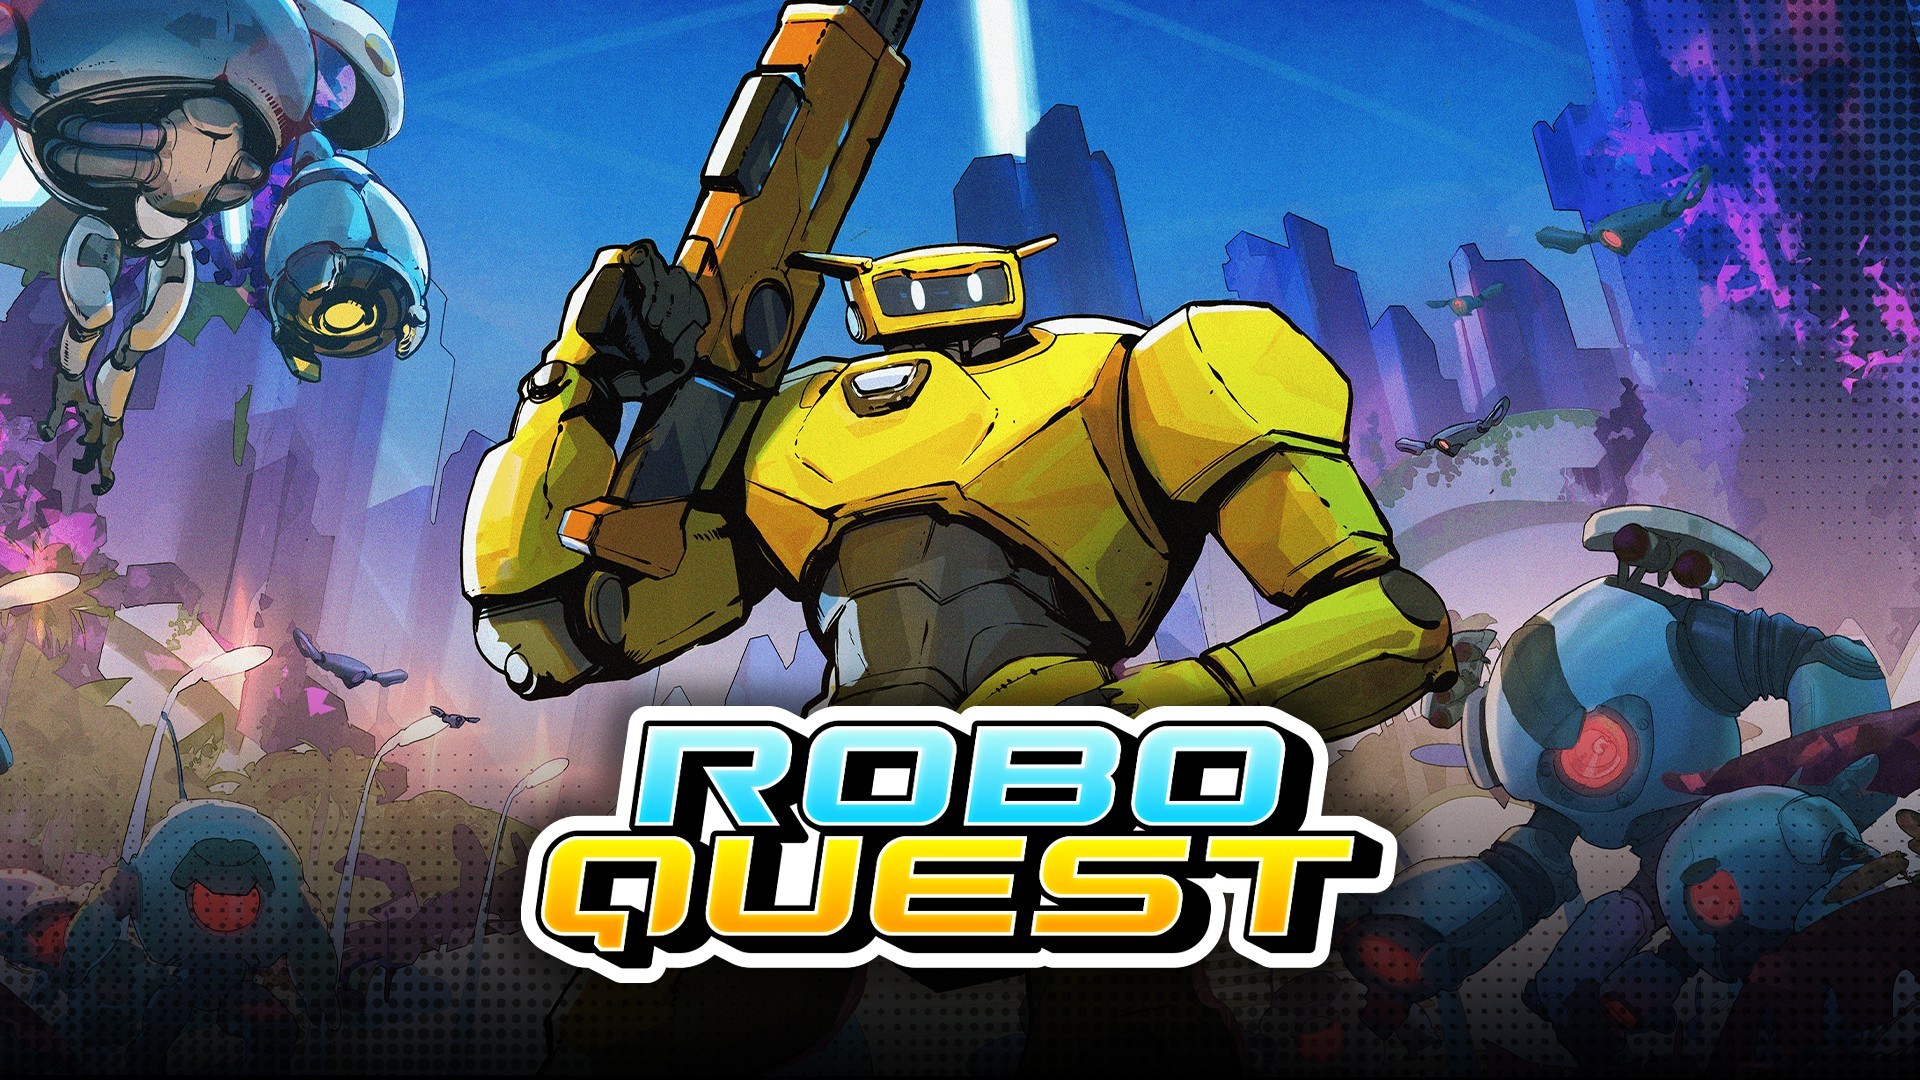 Video For Roboquest is Coming Soon to Wreak Havoc with Xbox Game Pass